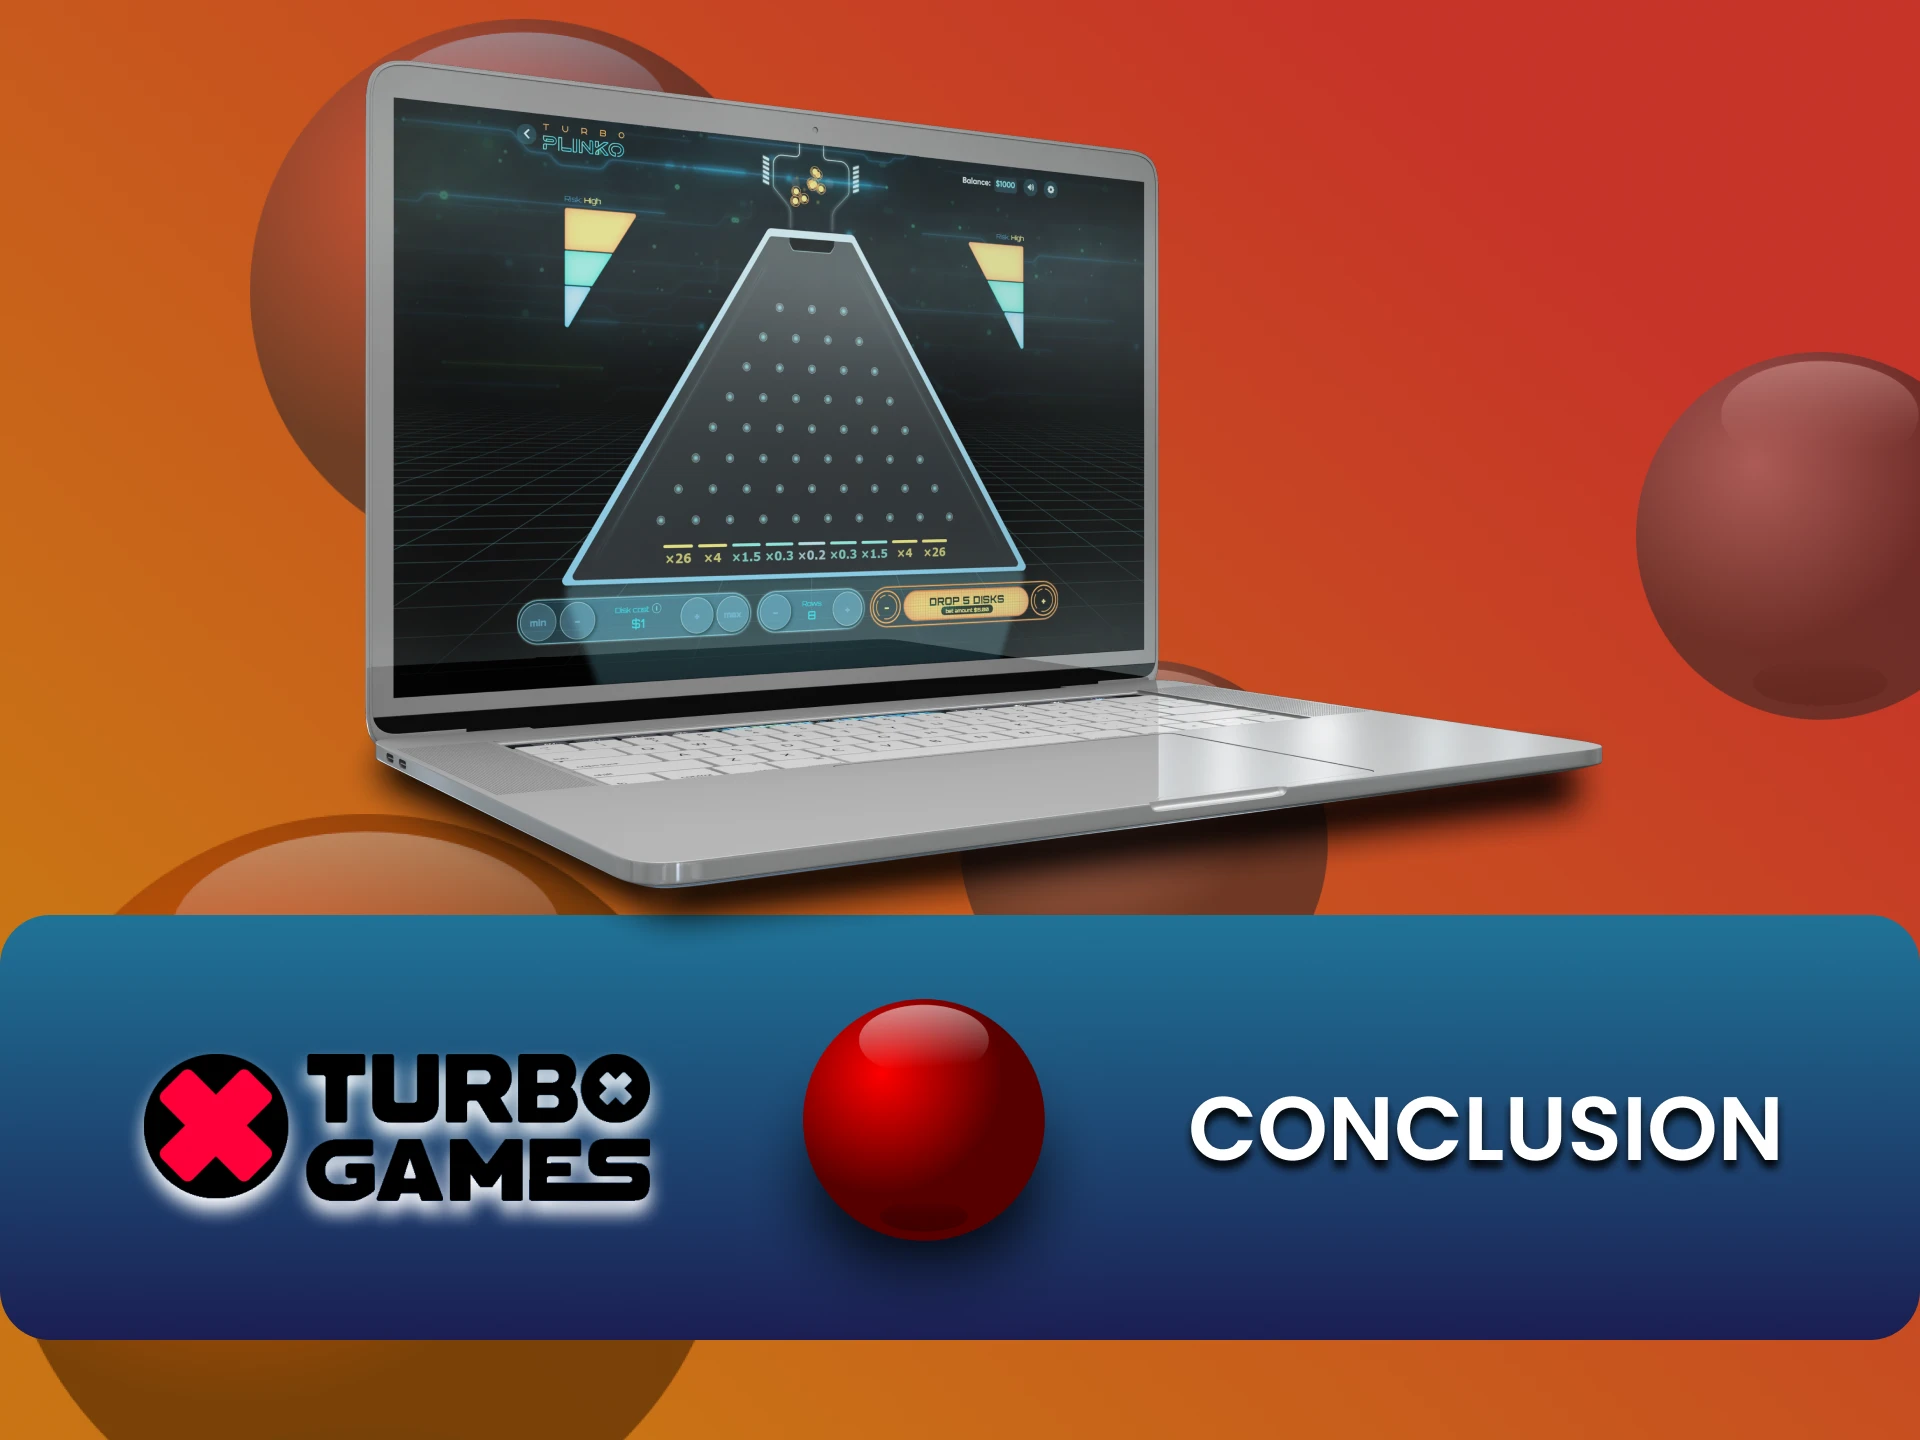 Turbo Games is a quality provider of casino games.